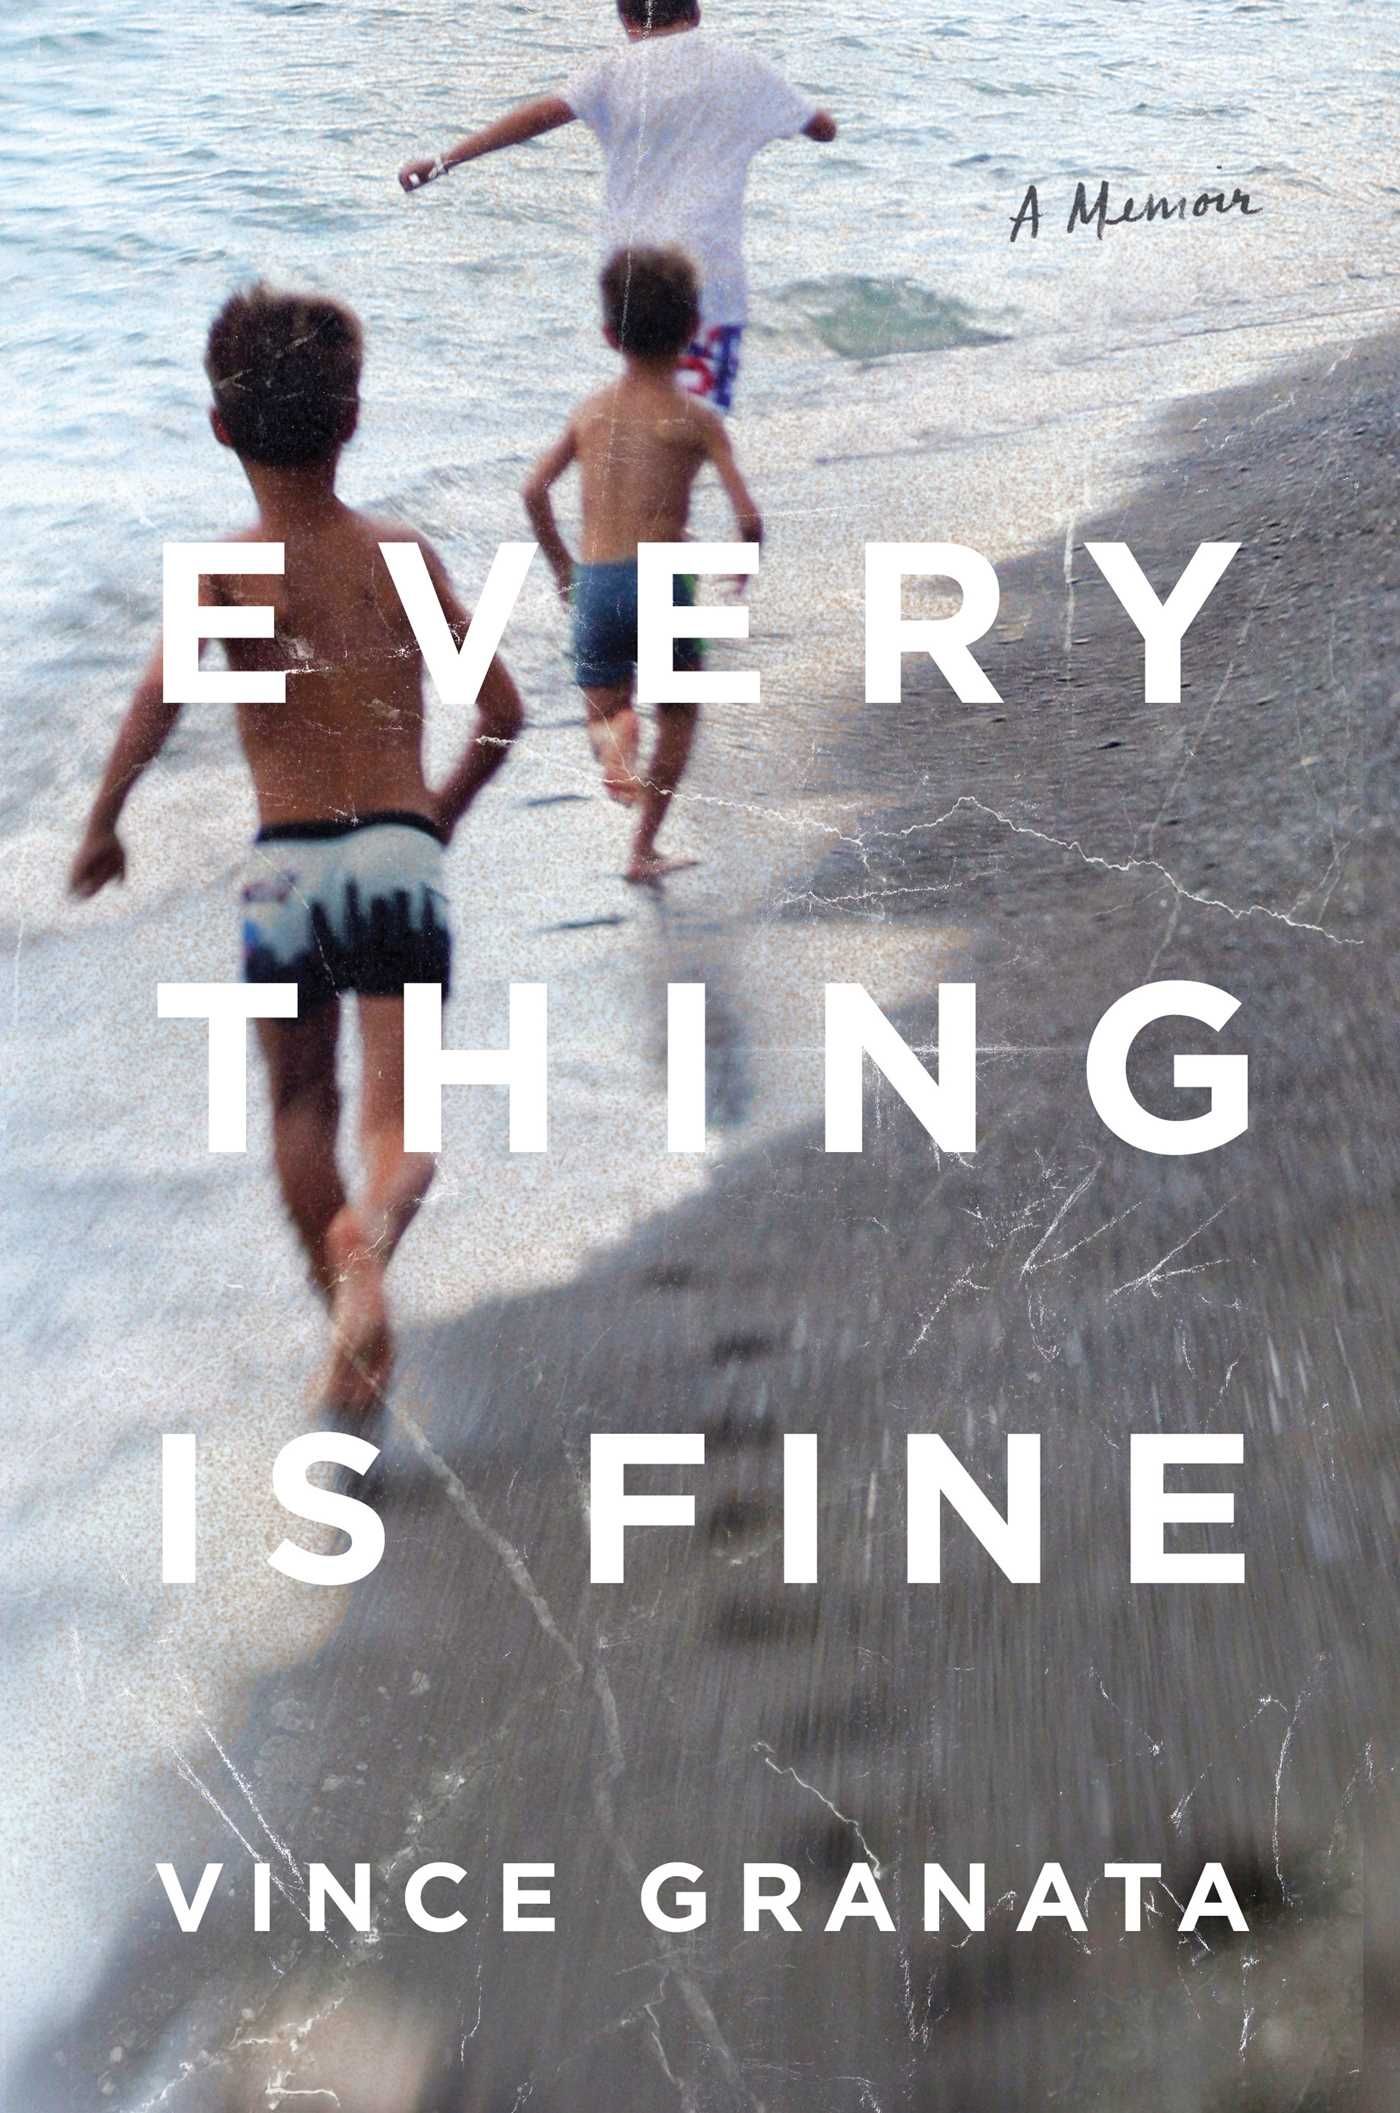 Cover of the book Everything is Fine by Vince Granata: two boys in swimming trunks running along a beach